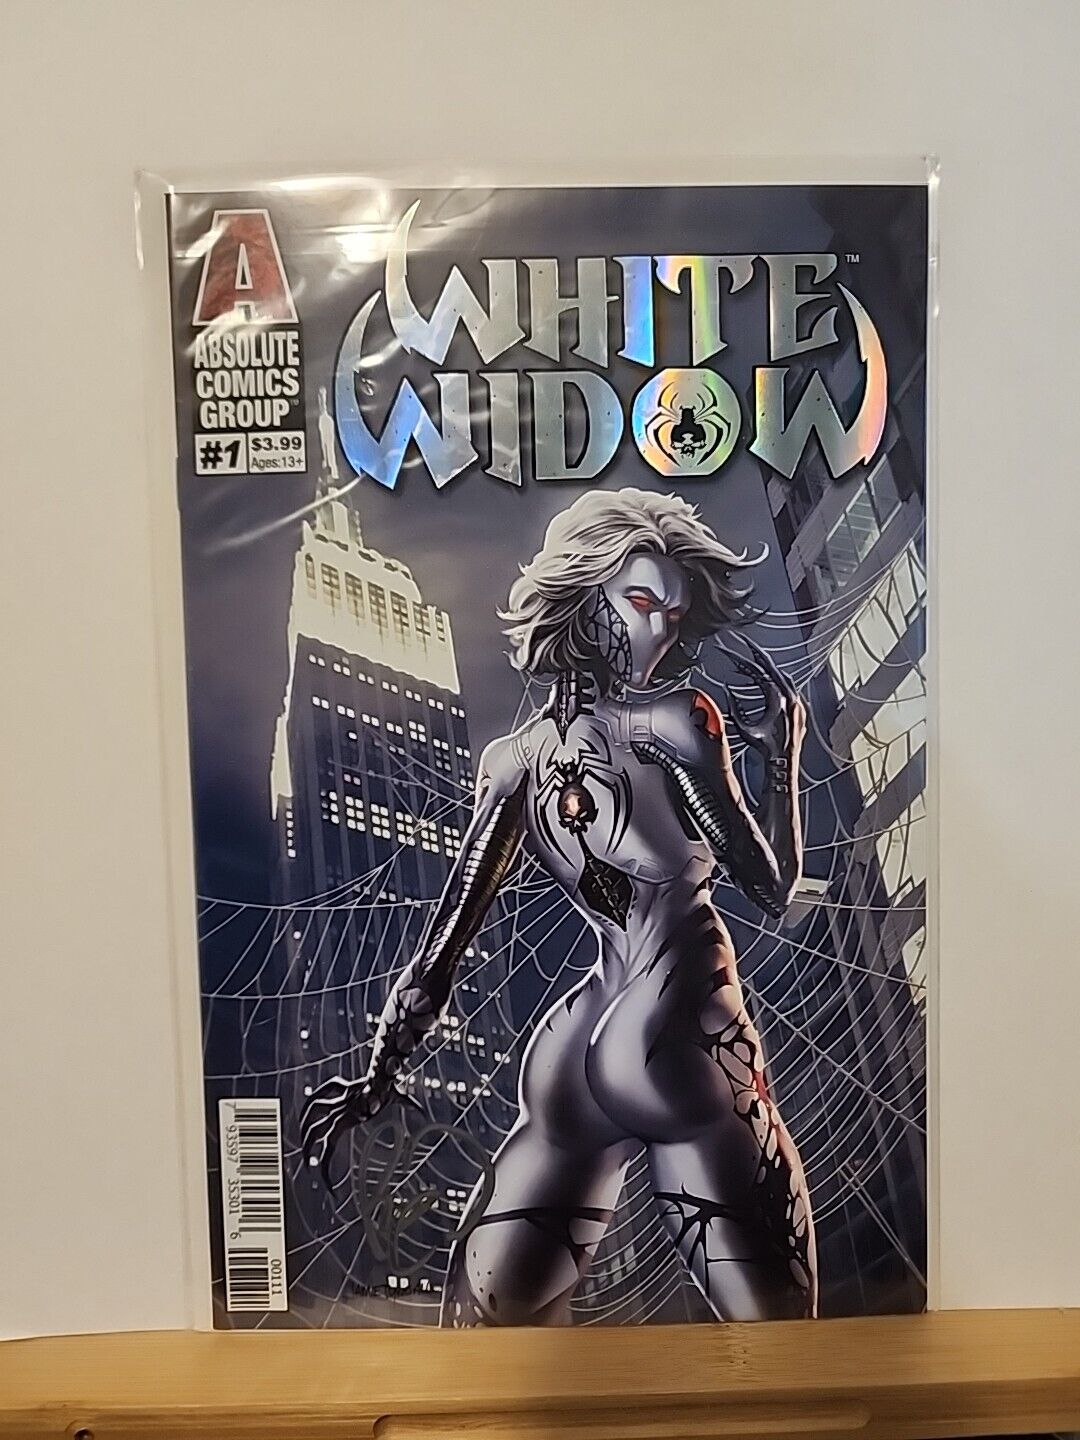 WHITE WIDOW #1 FIRST PRINT ( ABSOLUTE 2019 ) Signed Benny Powell